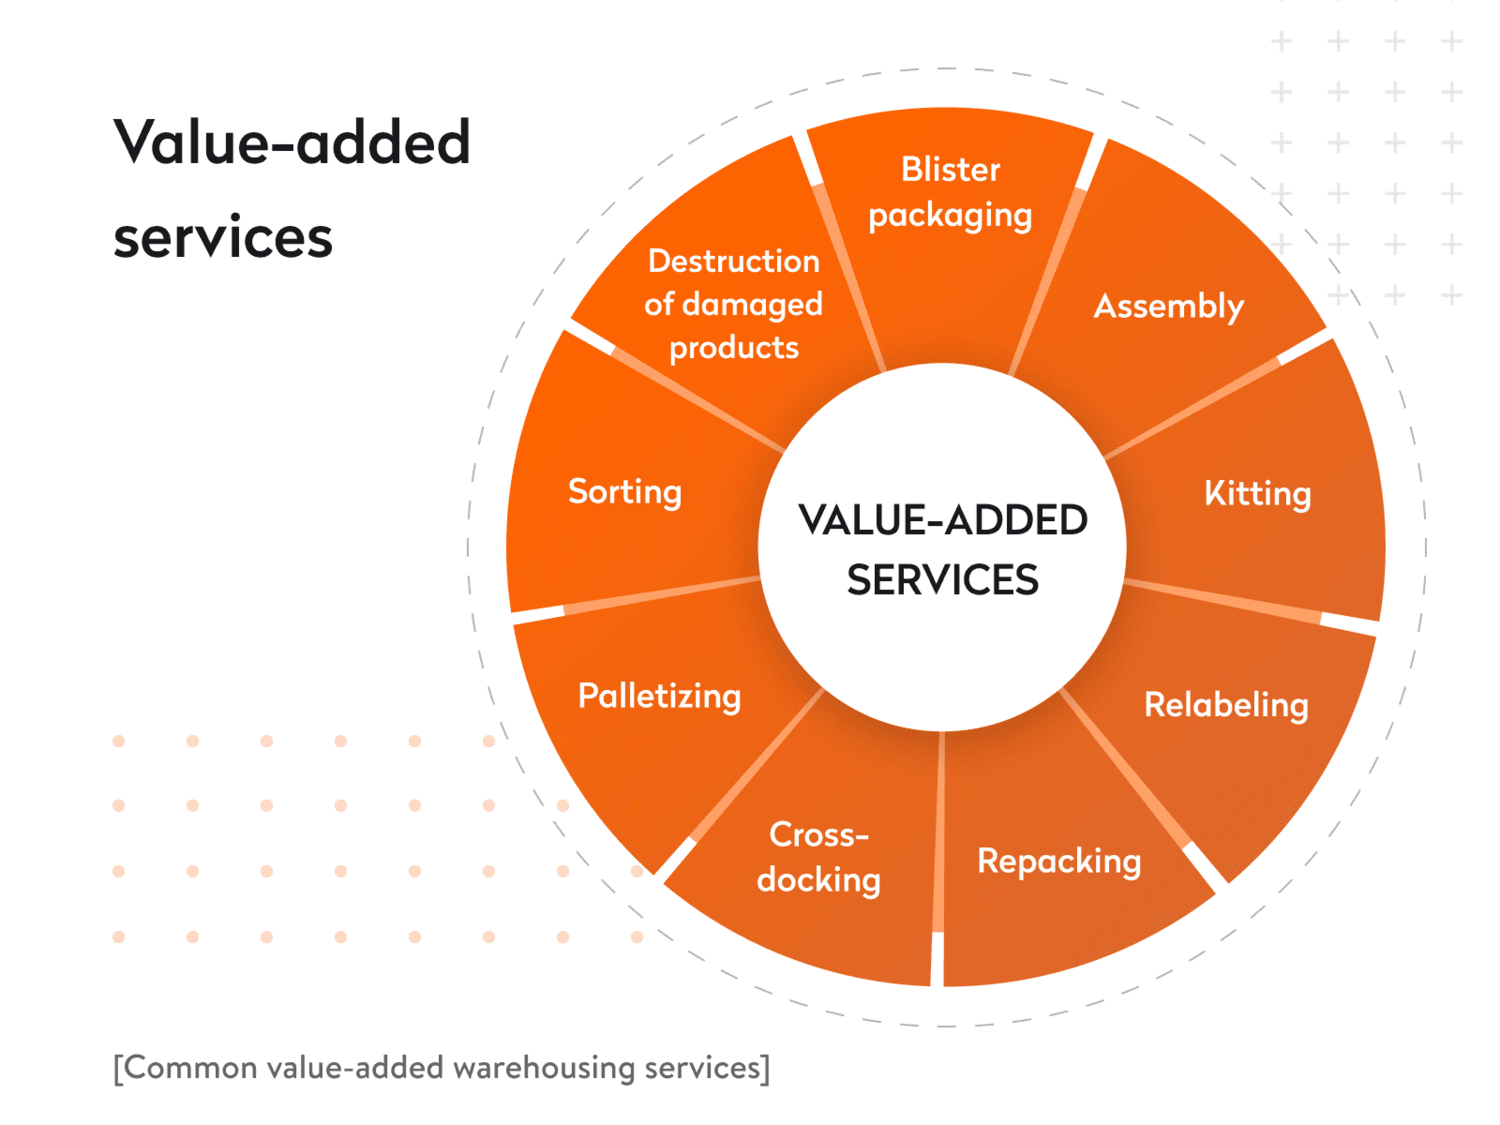 value added services